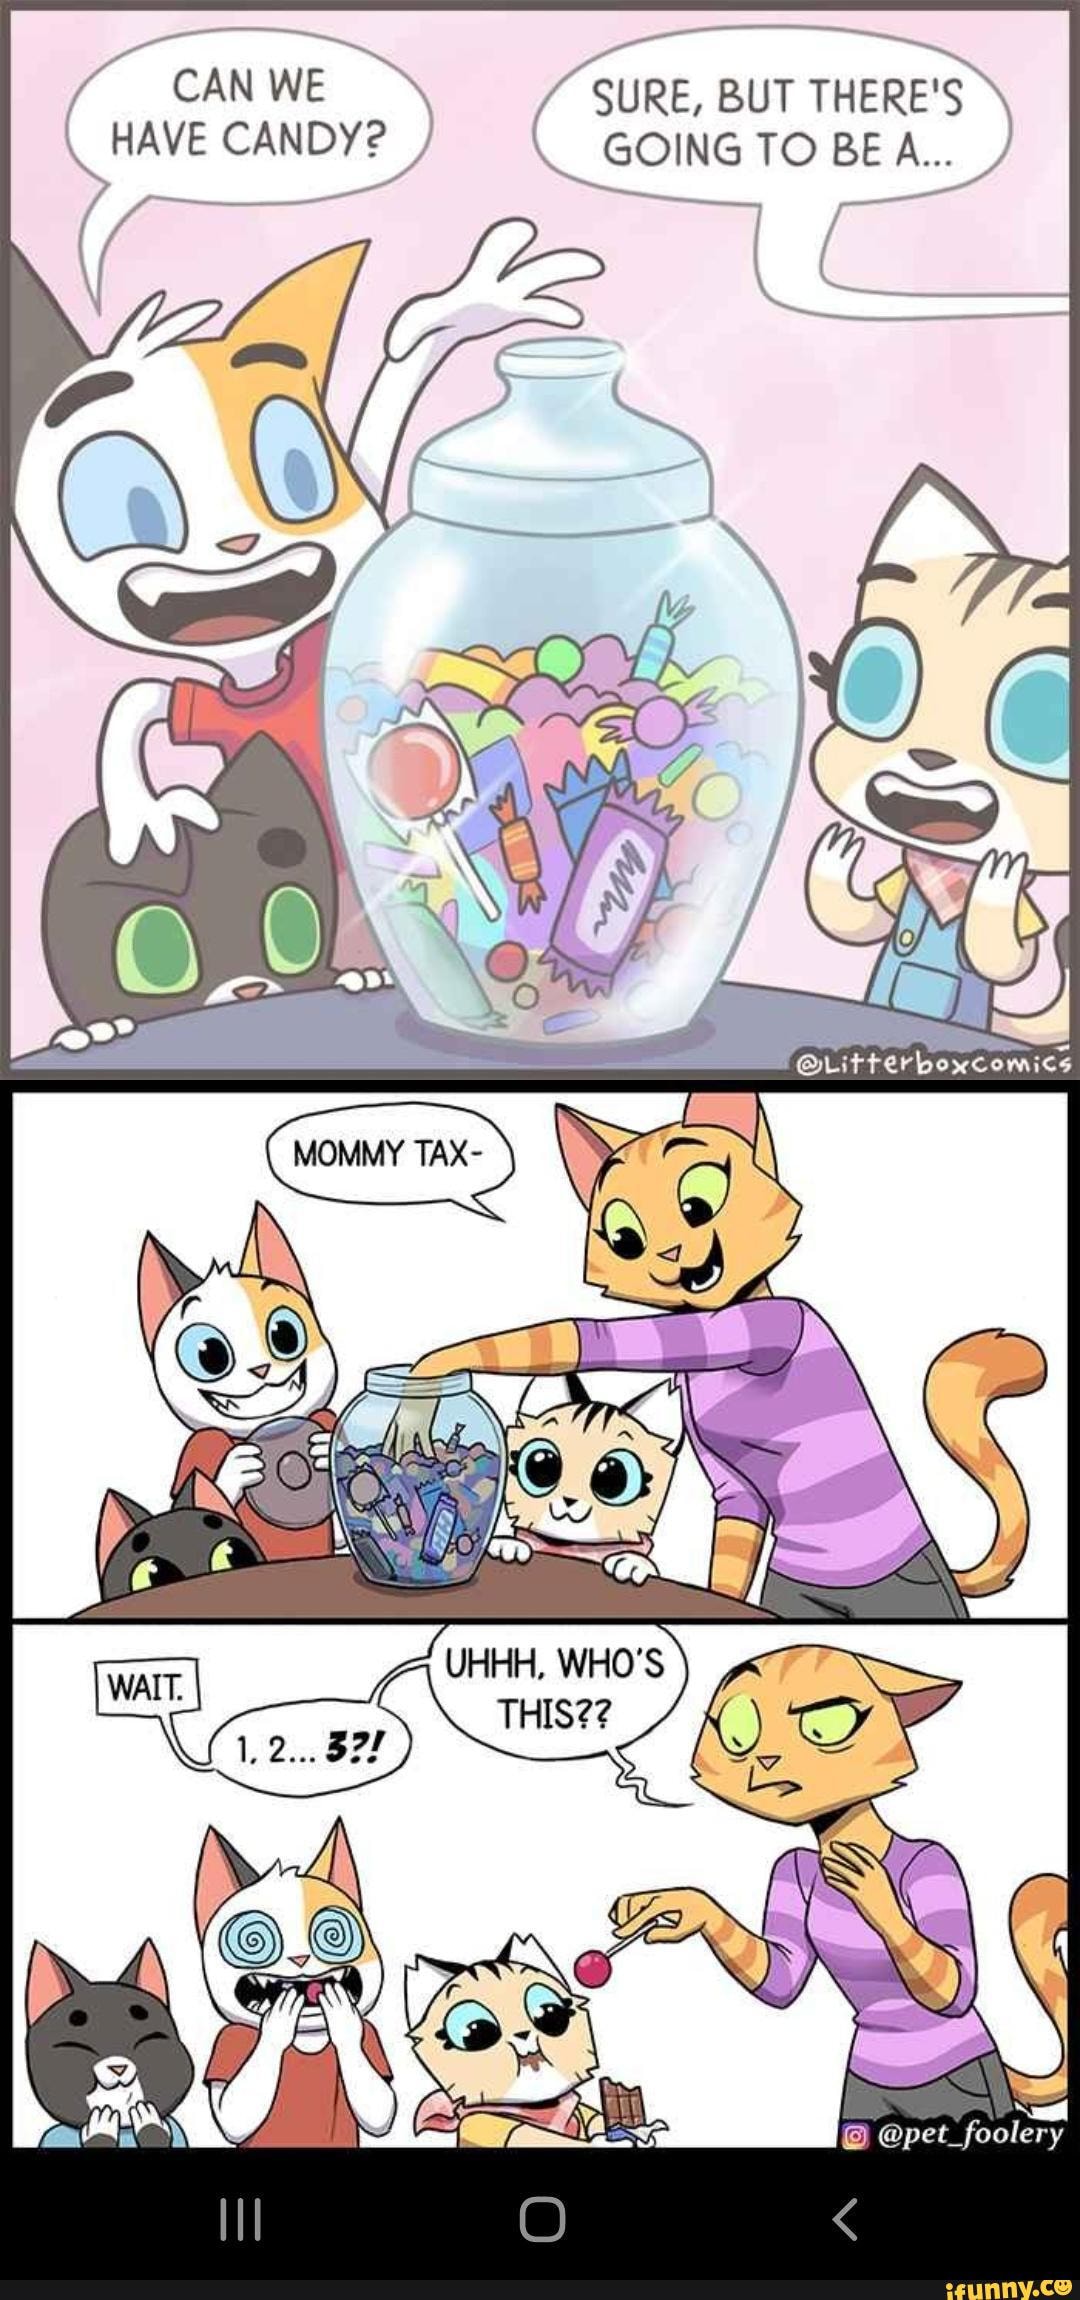 New crossover with pixie and brutus and litter box comics - CAN WE SURE,  BUT THERE'S HAVE CANDY? GOING TO BE A... UHHH, WHO'S THIS?? @ @pet_foolery  - iFunny Brazil